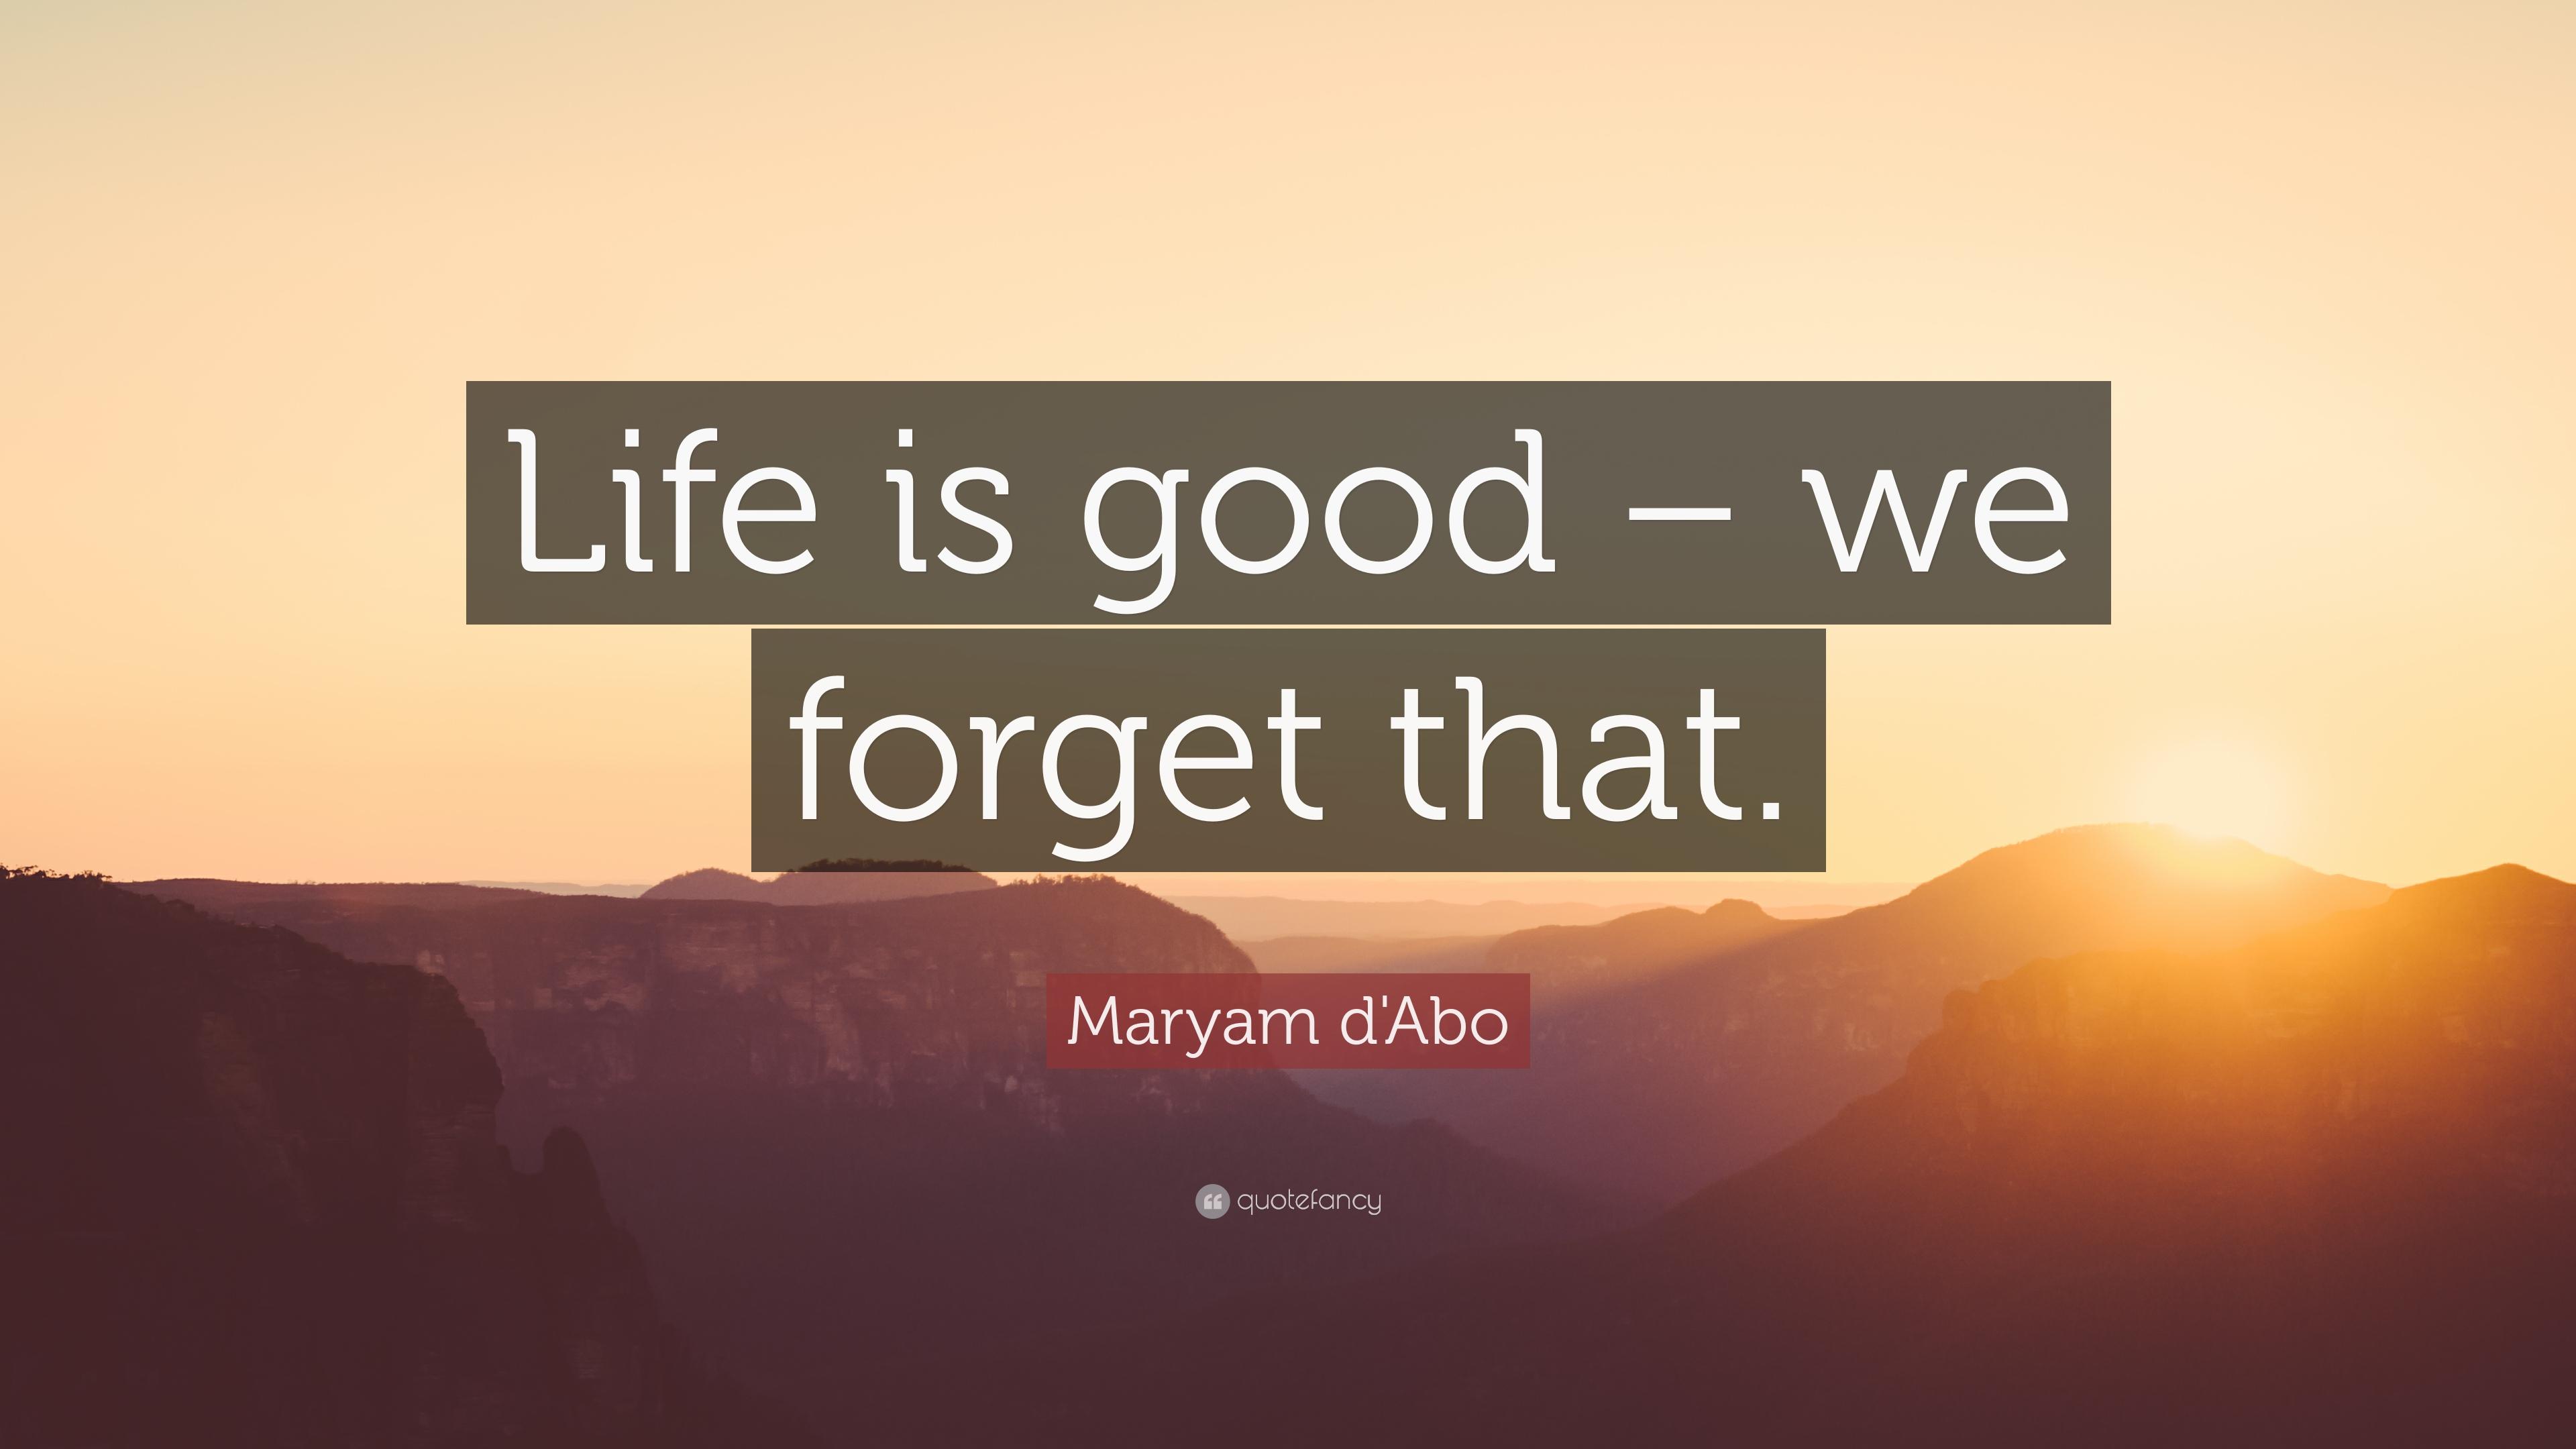 Maryam d'Abo Quote: “Life is good